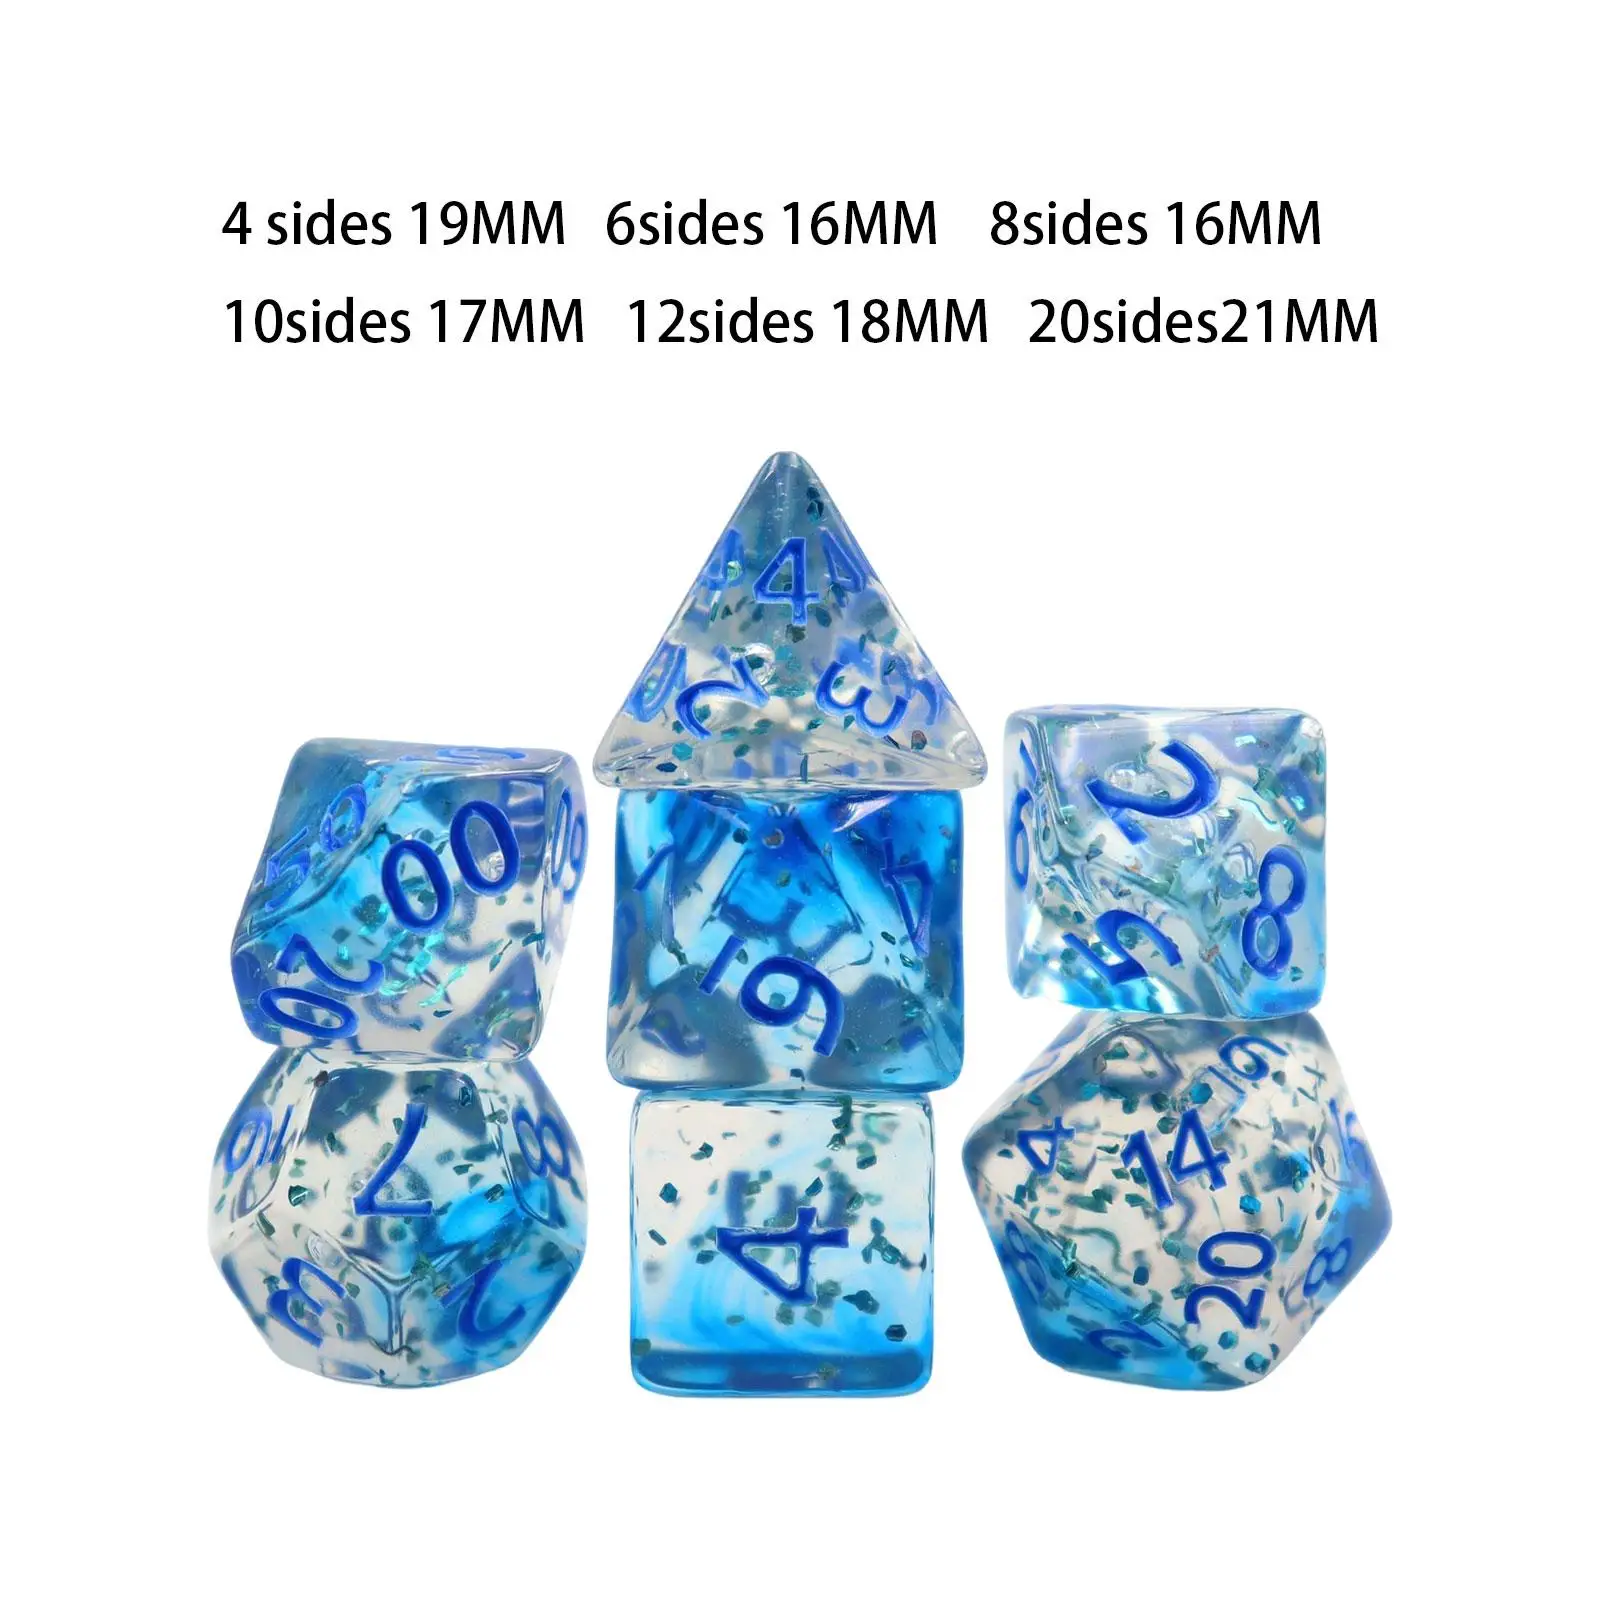 7x Polyhedral Dices Set D4,D6,D8,D10,D12,D20 Acrylic Multi Dices Board Game Accessories for Role Playing Party Favors